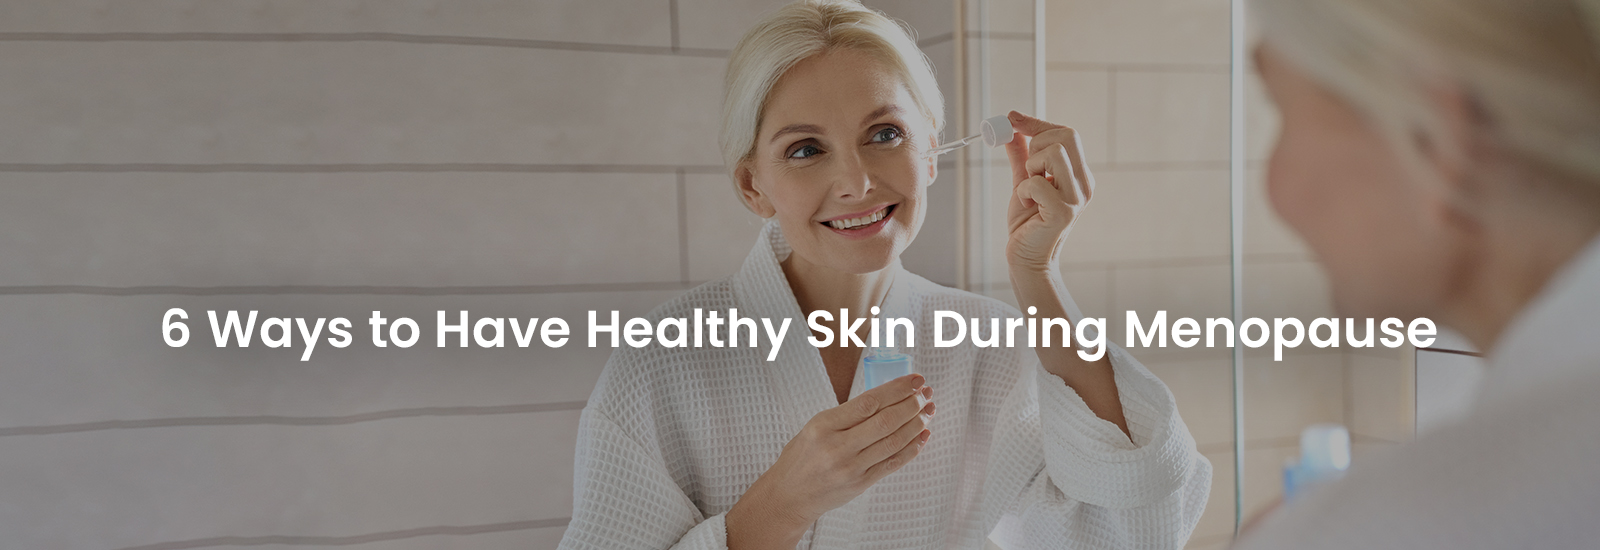 6 Ways to Have Healthy Skin During Menopause | Banner Image